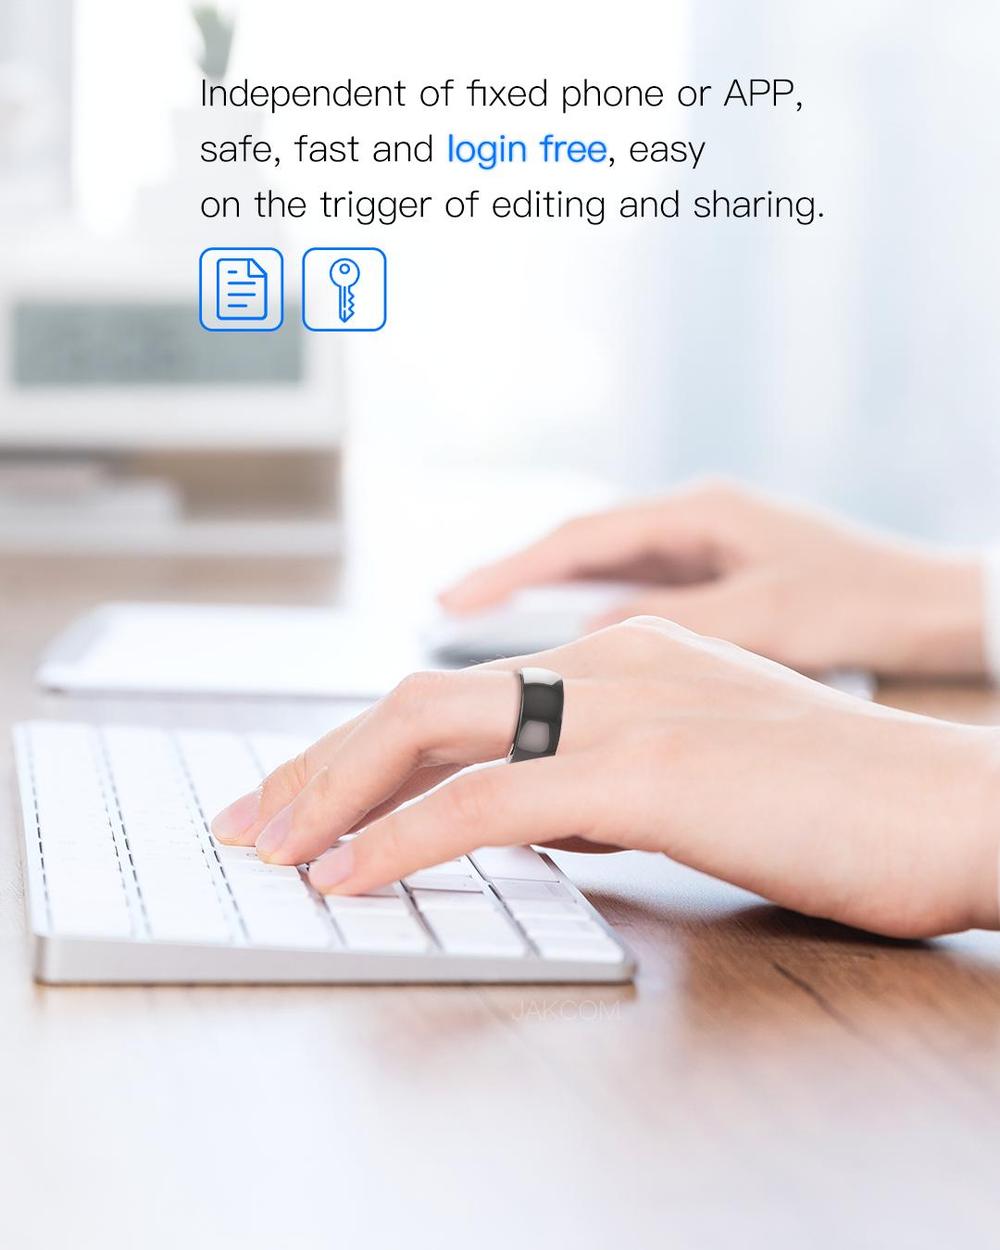 Smart Ring NFC Wear Jakcom R3 R4 technology Magic Finger Smart NFC Ring For Ios Android Windows NFC Mobile Phone